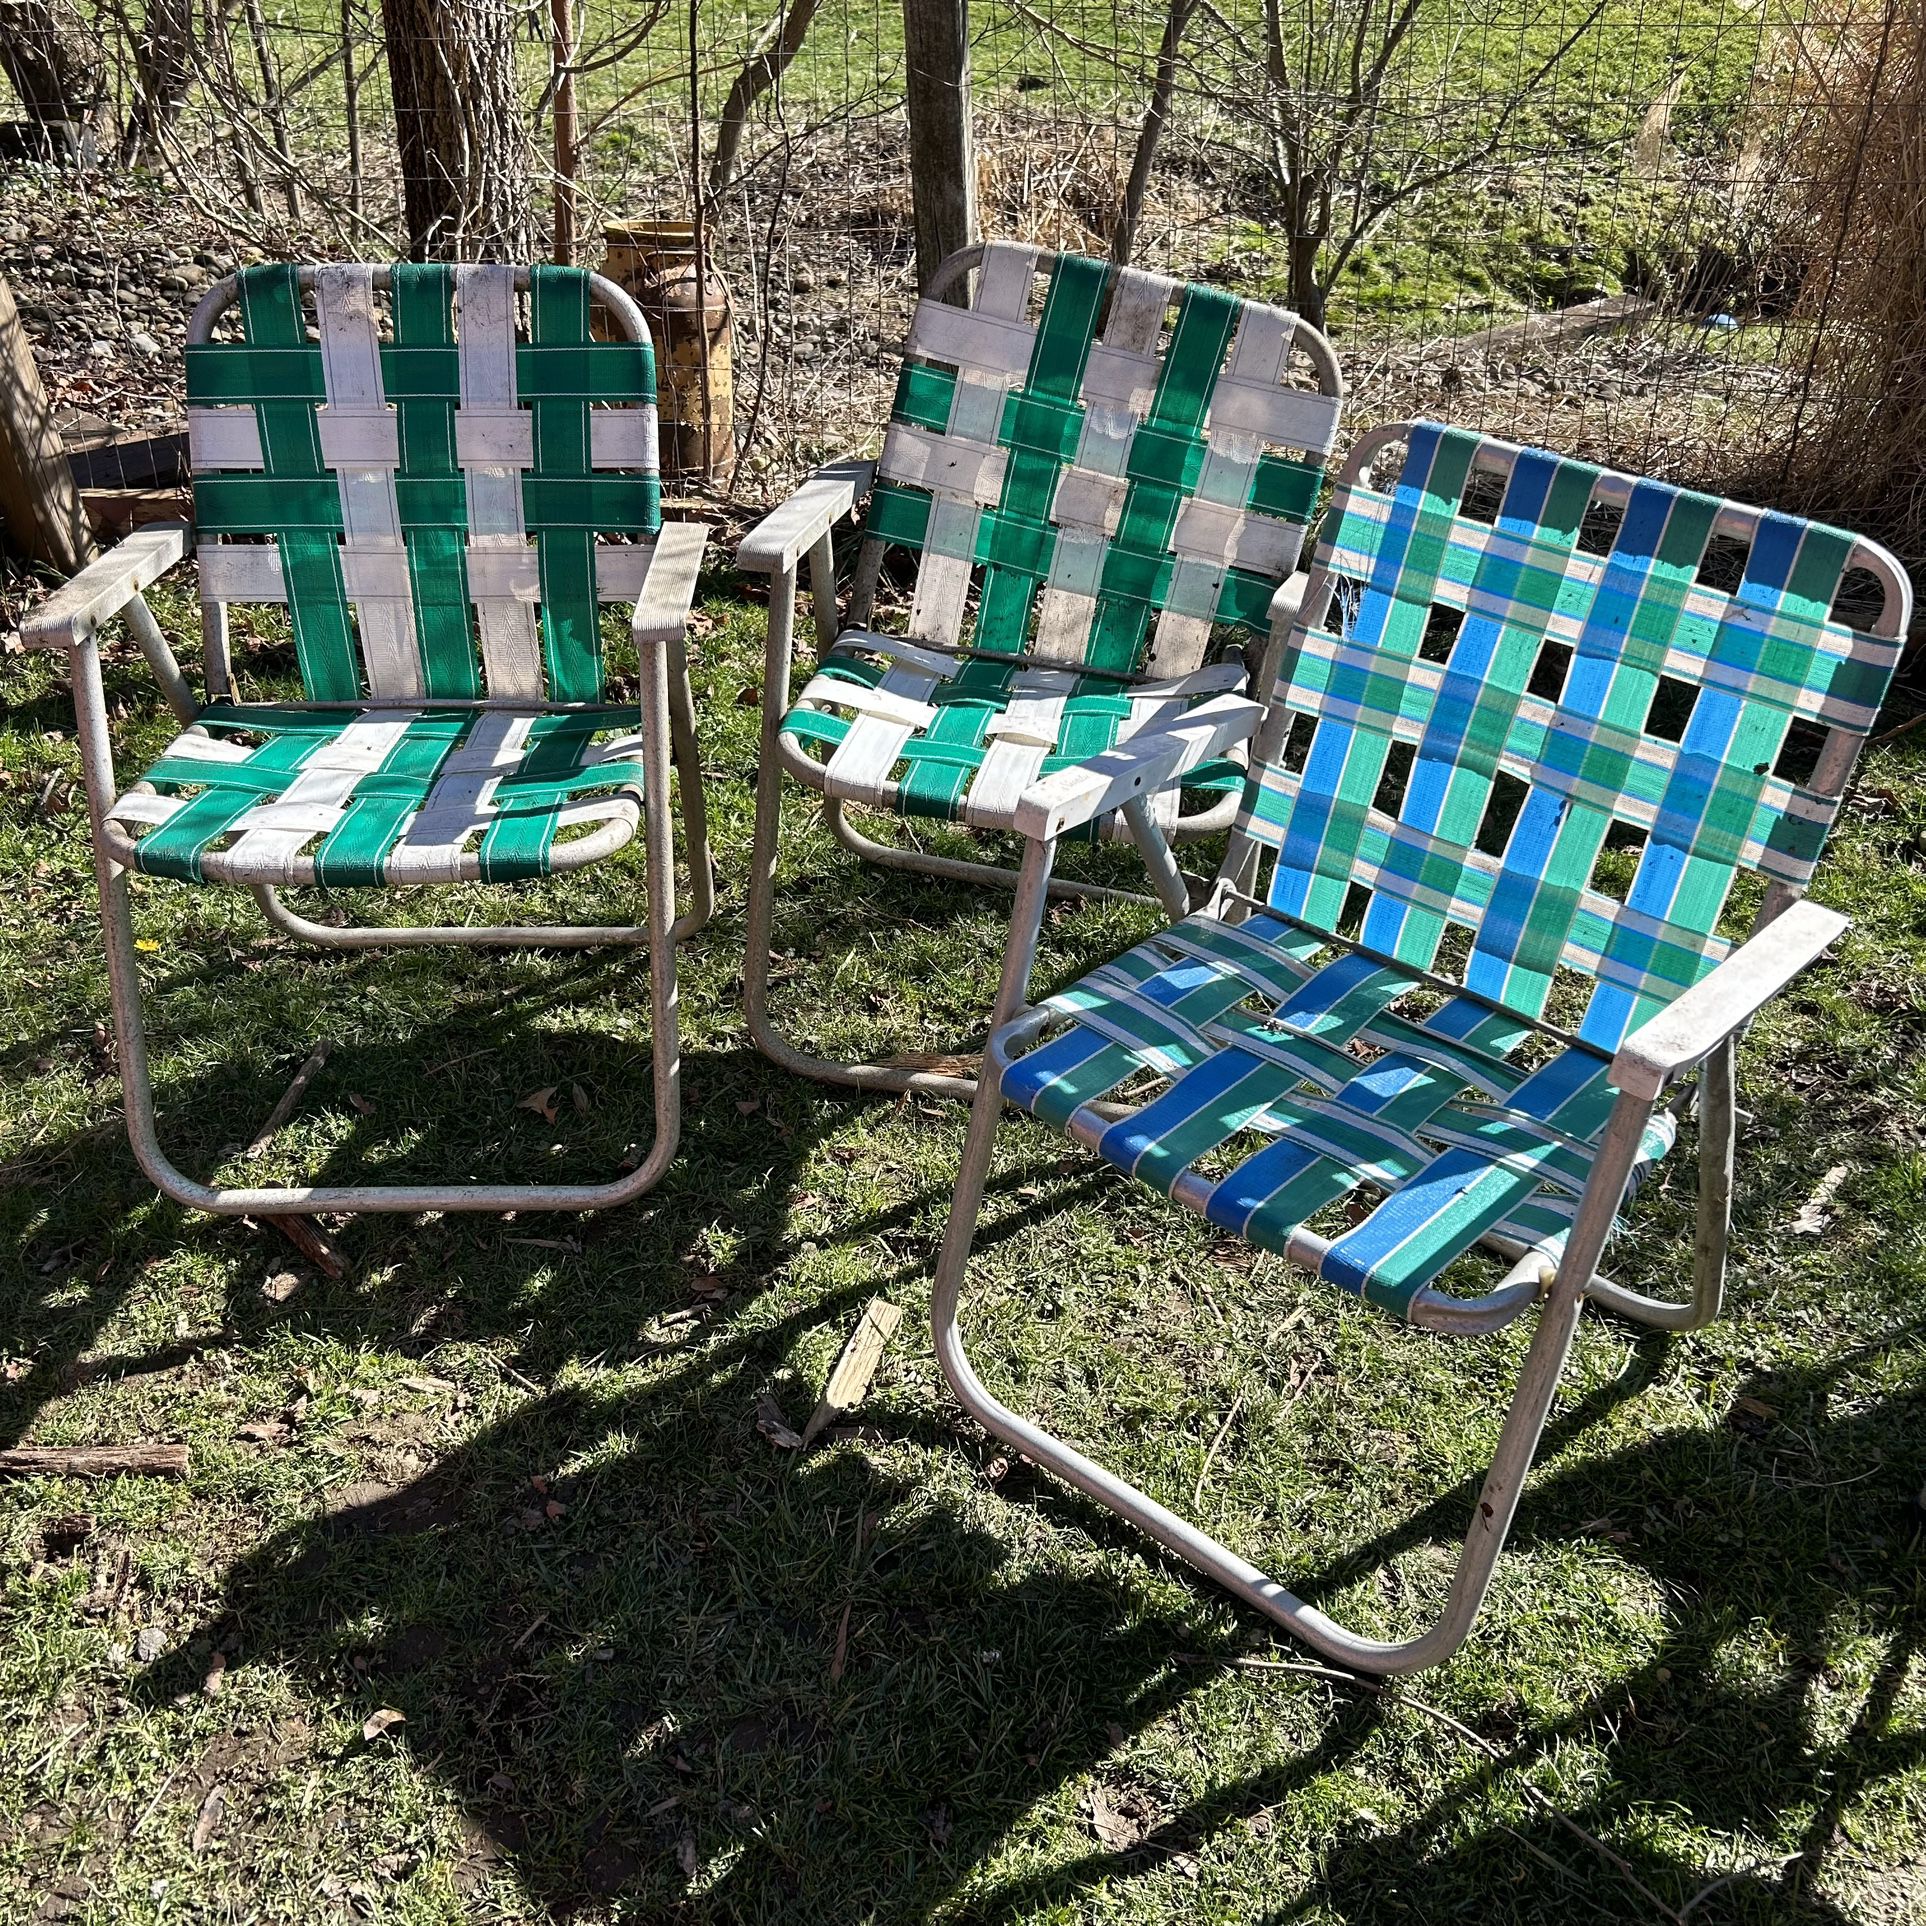 Vintage Folding Chair Set Of 3 Blue Green Silver Retro Lawn Chairs Aluminum Set